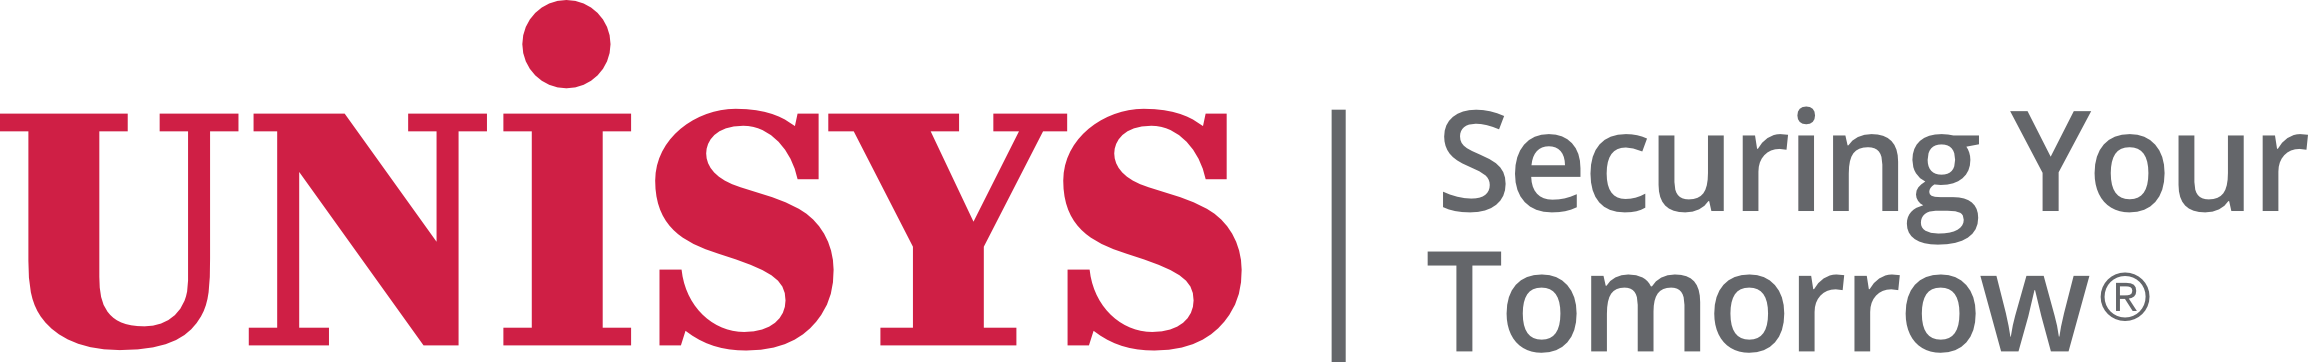 Unisys Secure Your Tomorrow logo